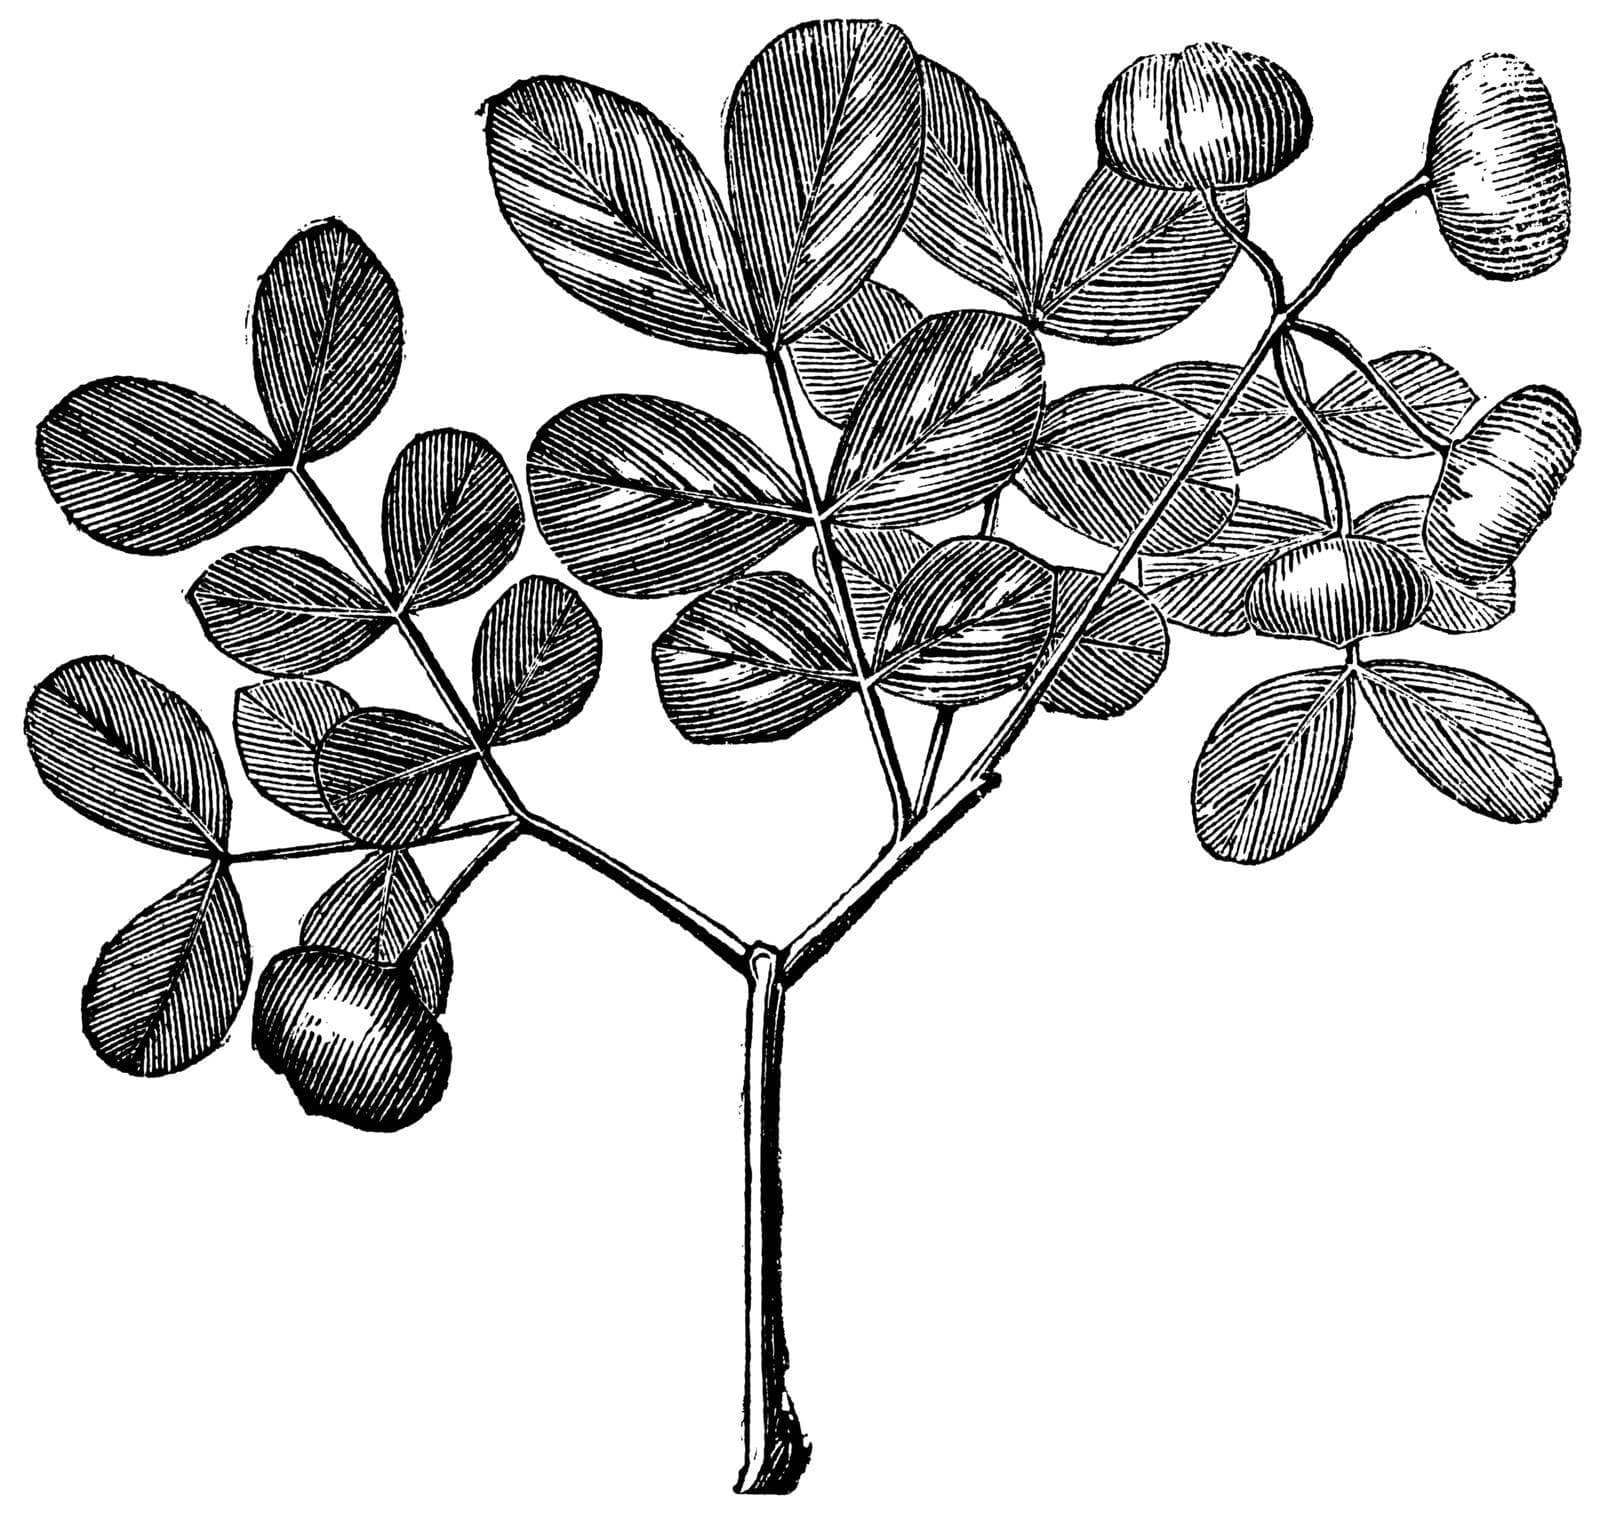 Guaiacum officinale or Roughbark Lignum-vitae, vintage engraving. Old engraved illustration of Guaiacum officinale, leaves isolated on a white background.